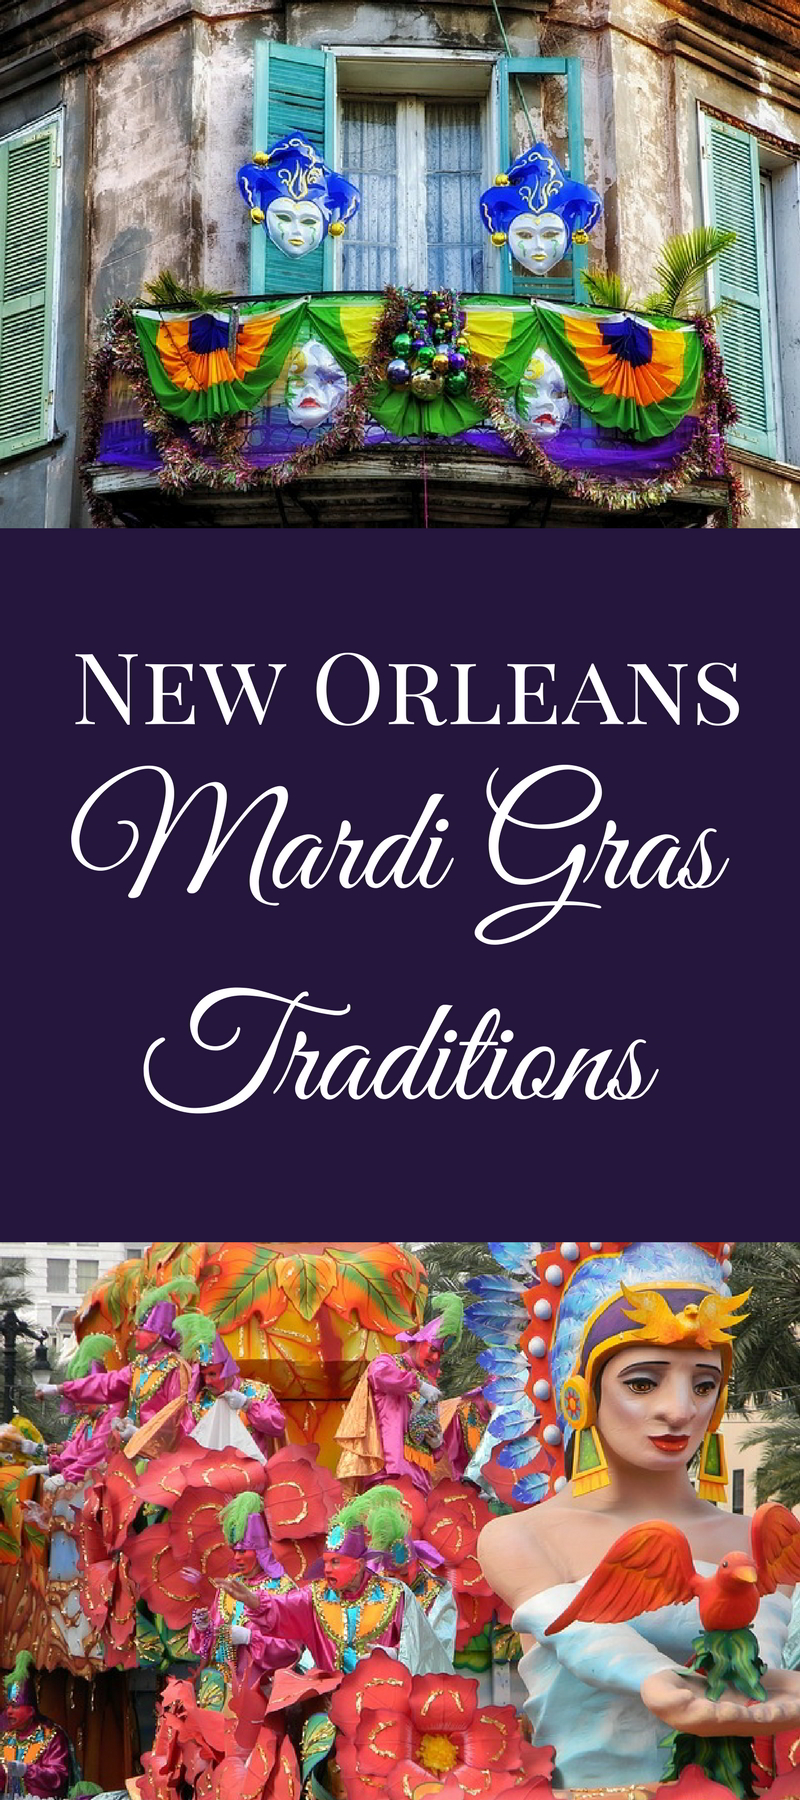 As you mark the days until Fat Tuesday, learn about some of the history of most famous New Orleans Mardi Gras traditions.